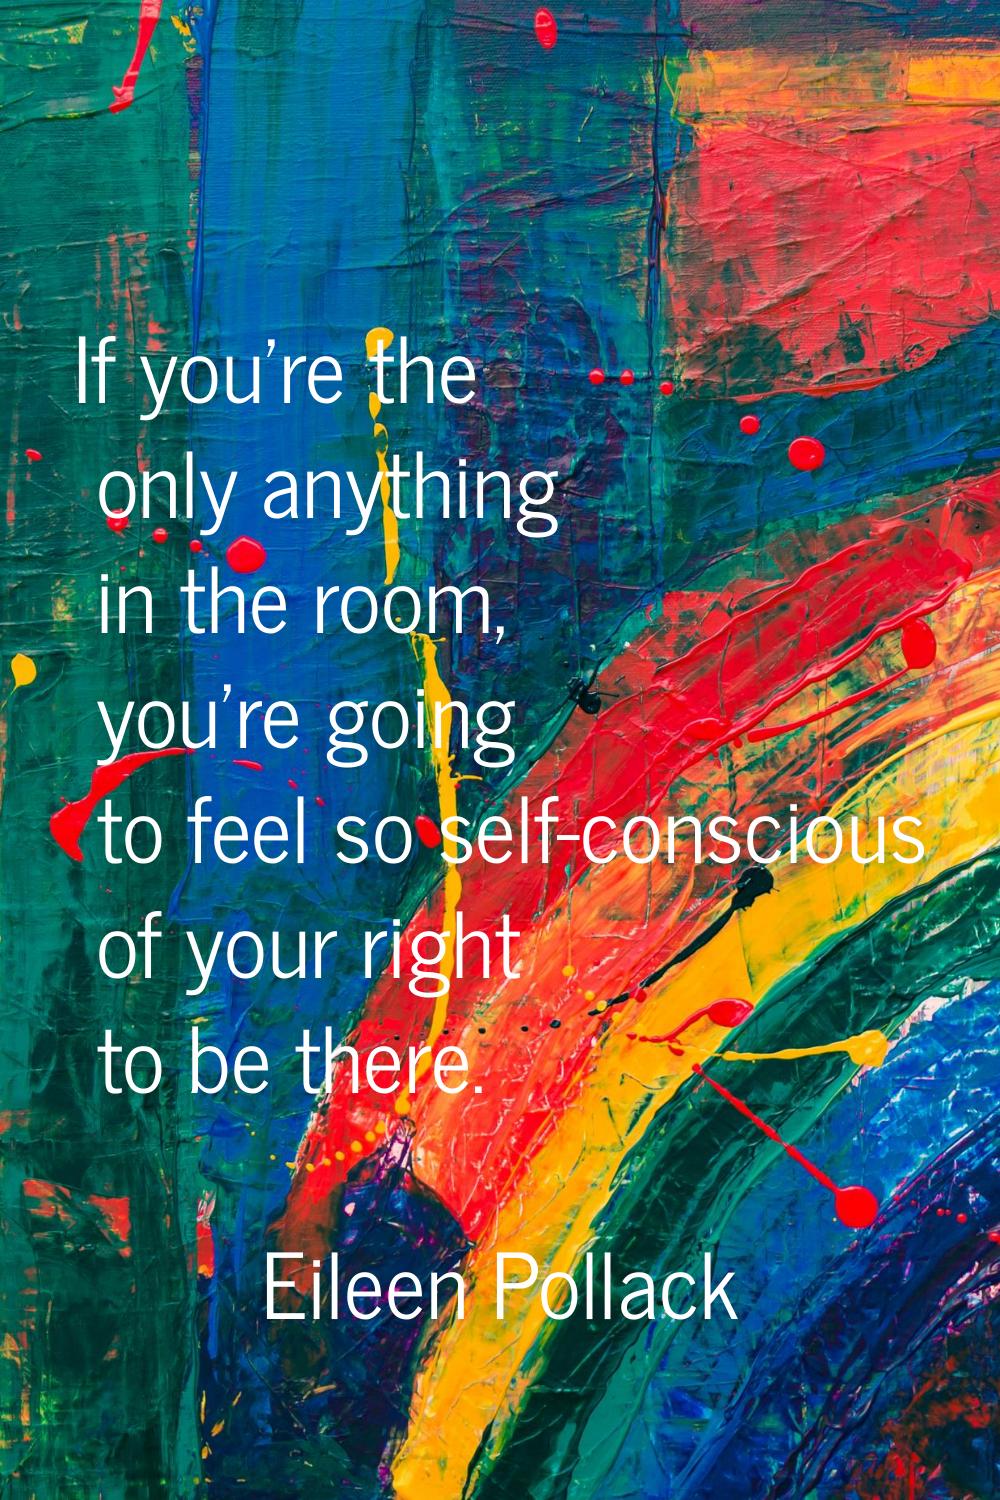 If you're the only anything in the room, you're going to feel so self-conscious of your right to be